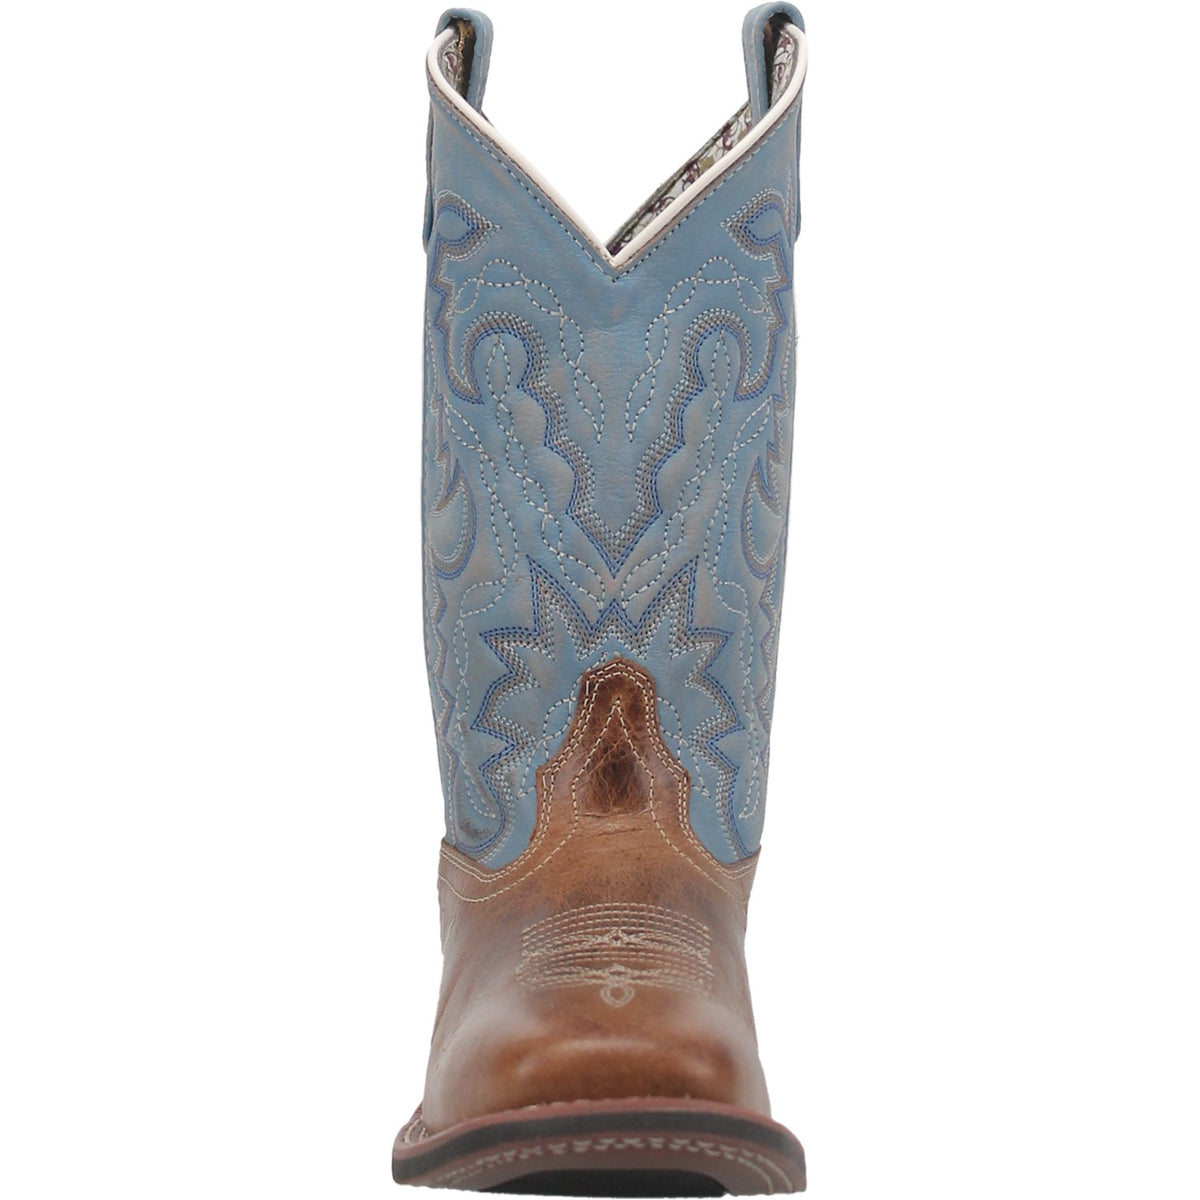 DARLA LEATHER BOOT Cover